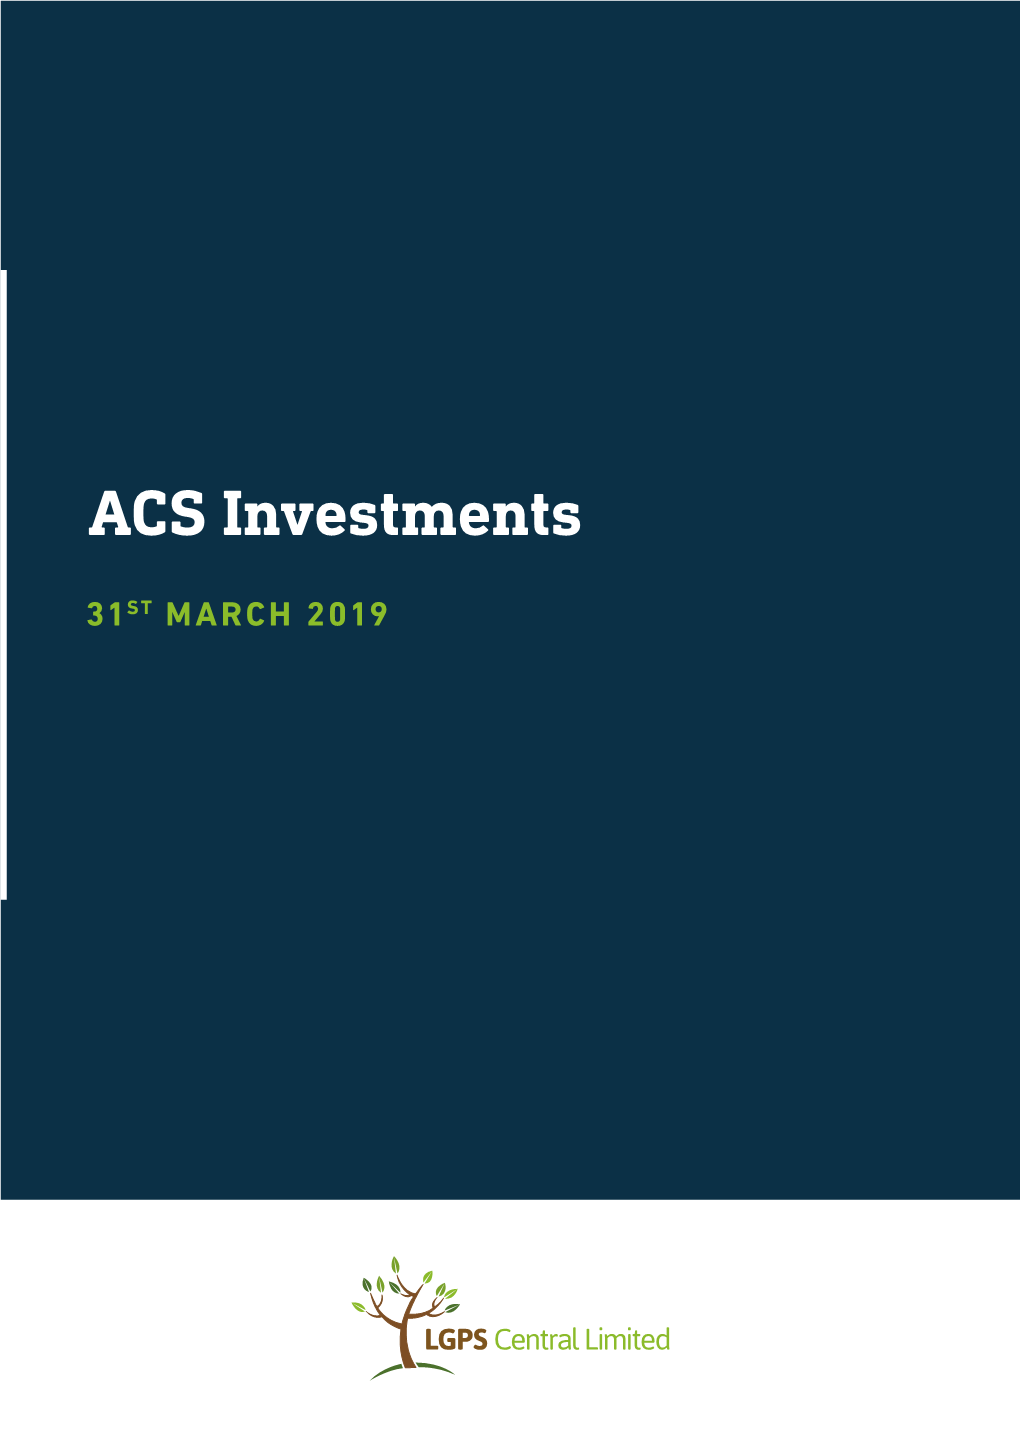 Acs Sub Fund Investments March 2019